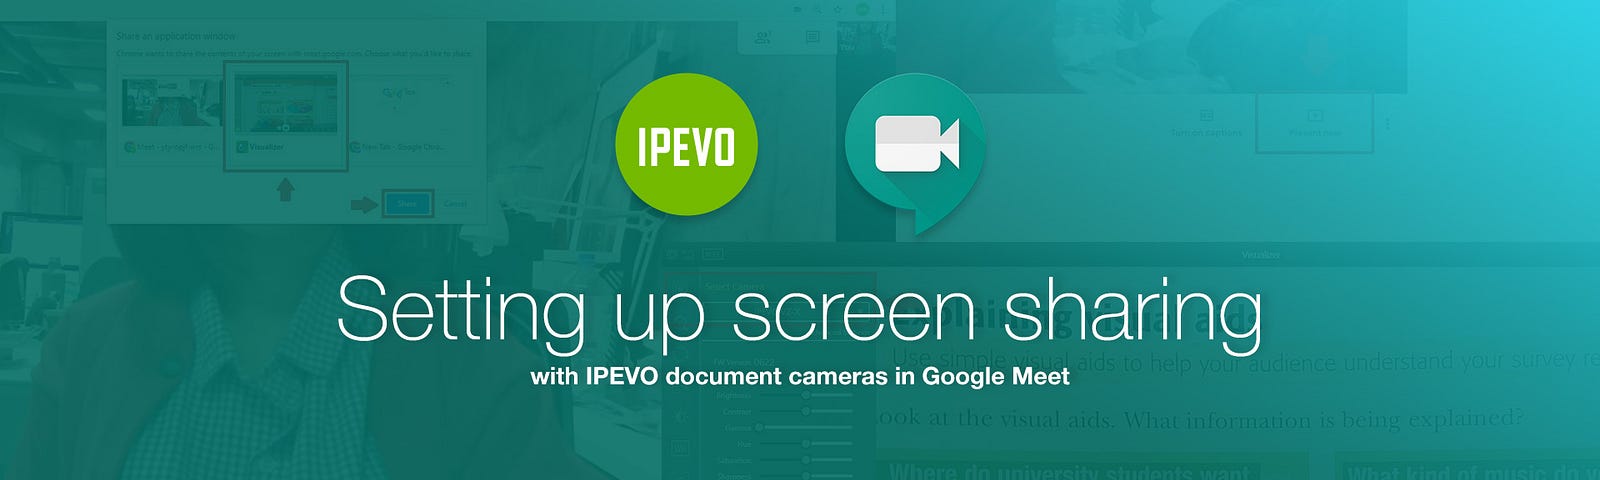 Setting up screen sharing with IPEVO document cameras in Google Meet